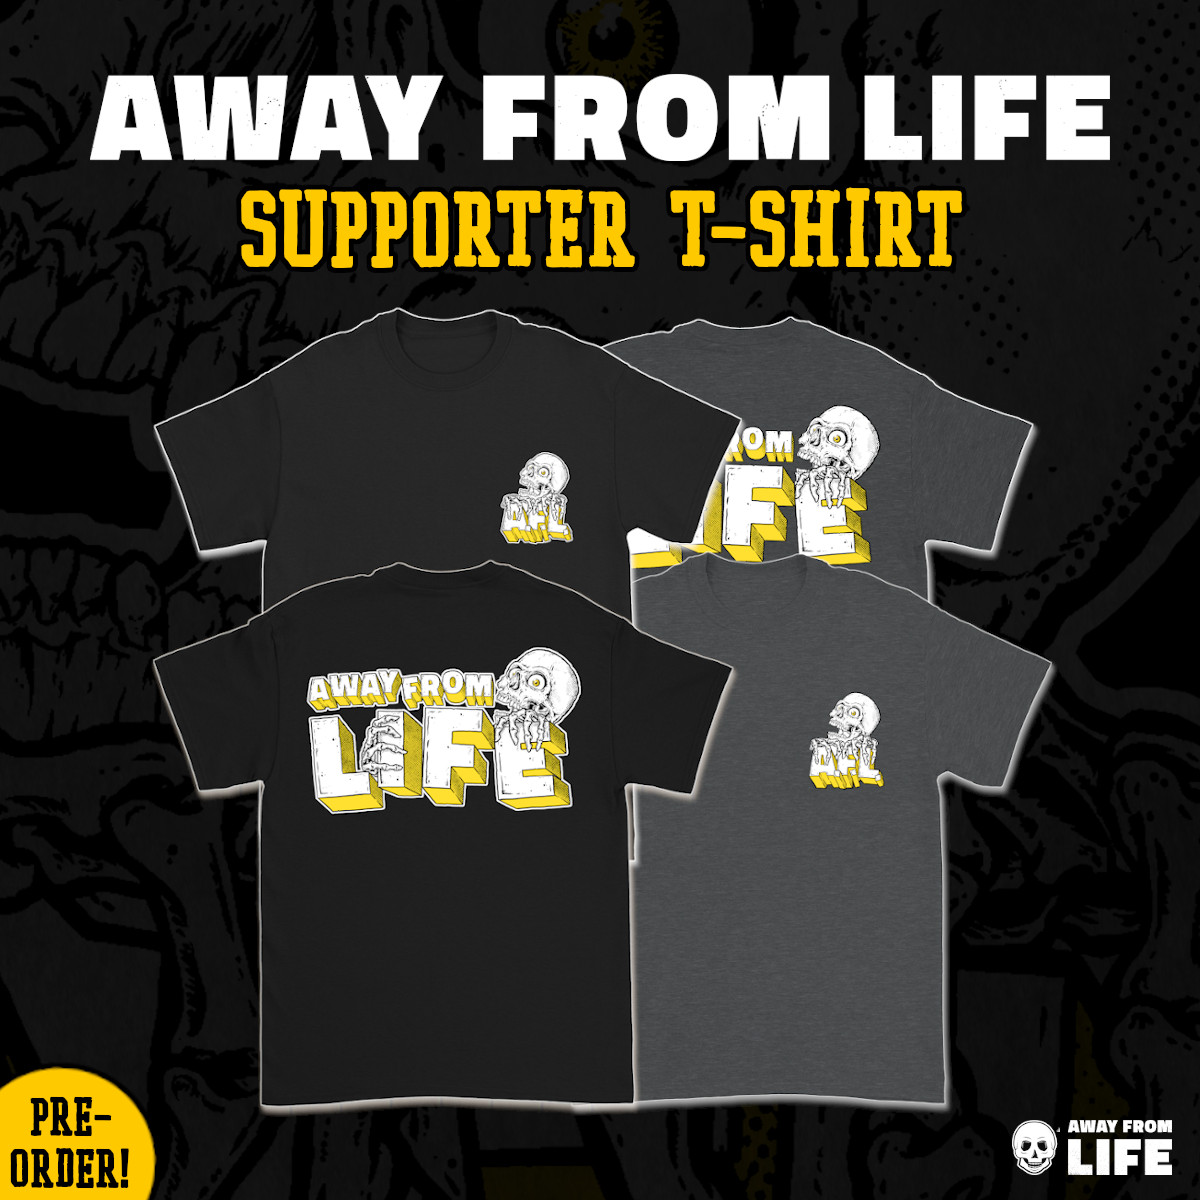 AWAY FROM LIFE Supporter T-Shirt